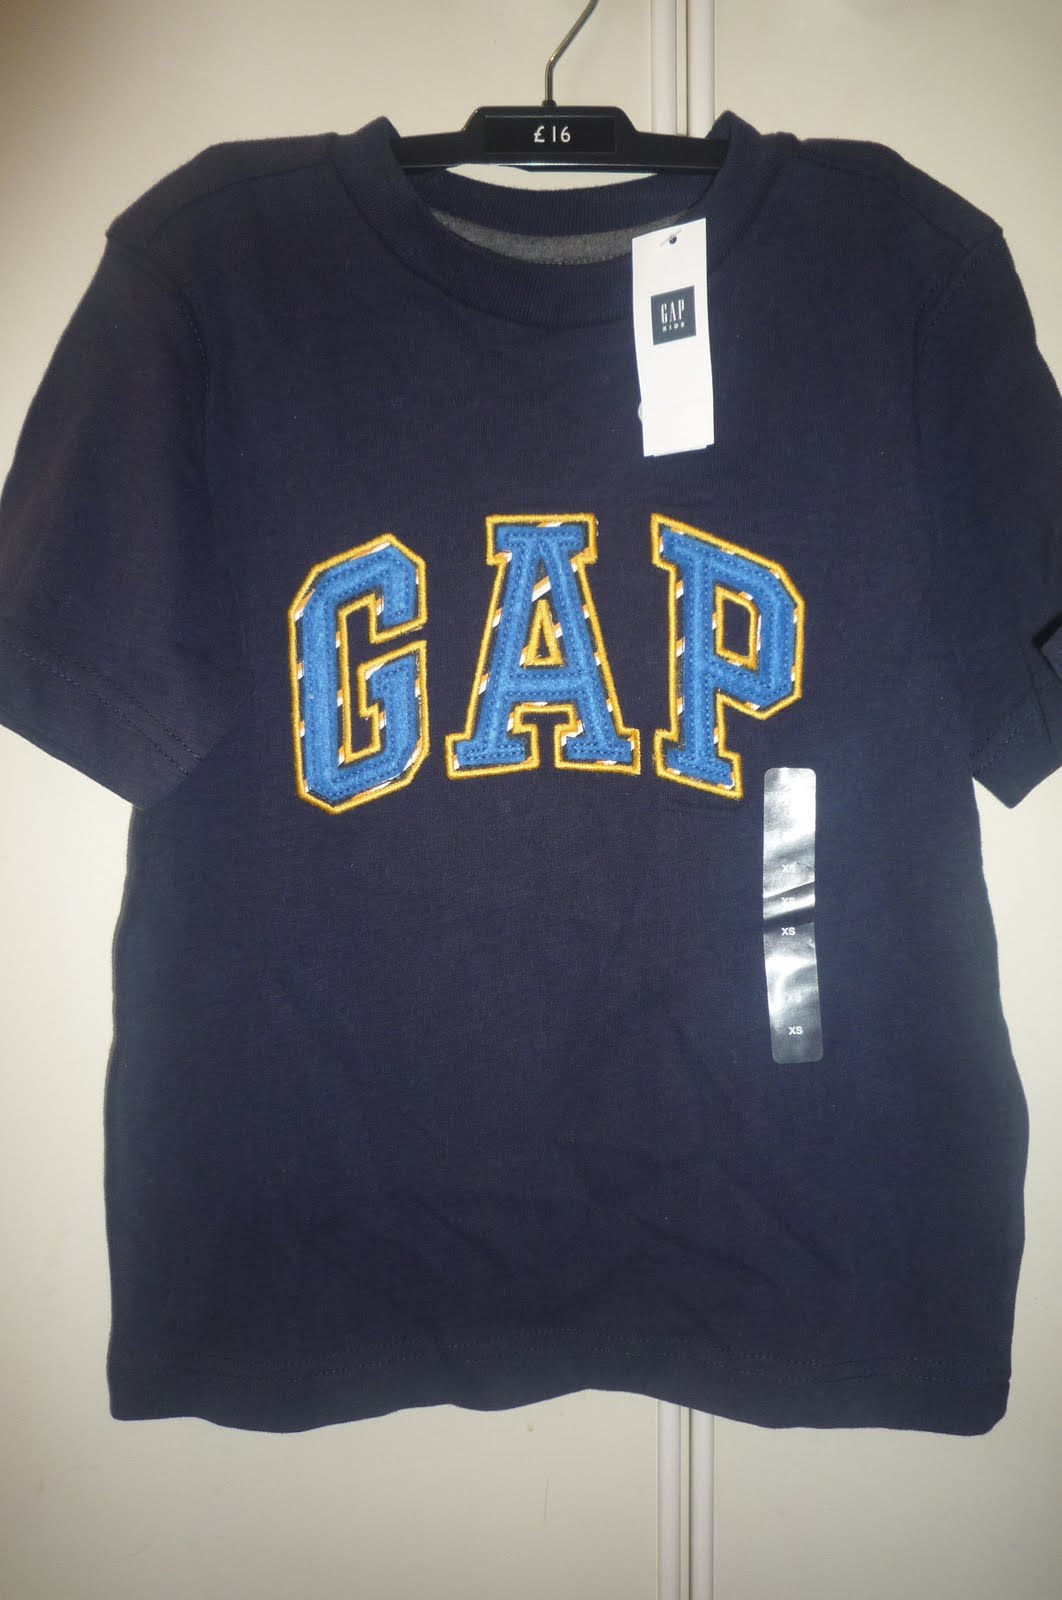 Busybeeroom Welcomes You: GAP KIDS TEE - WITH TAG